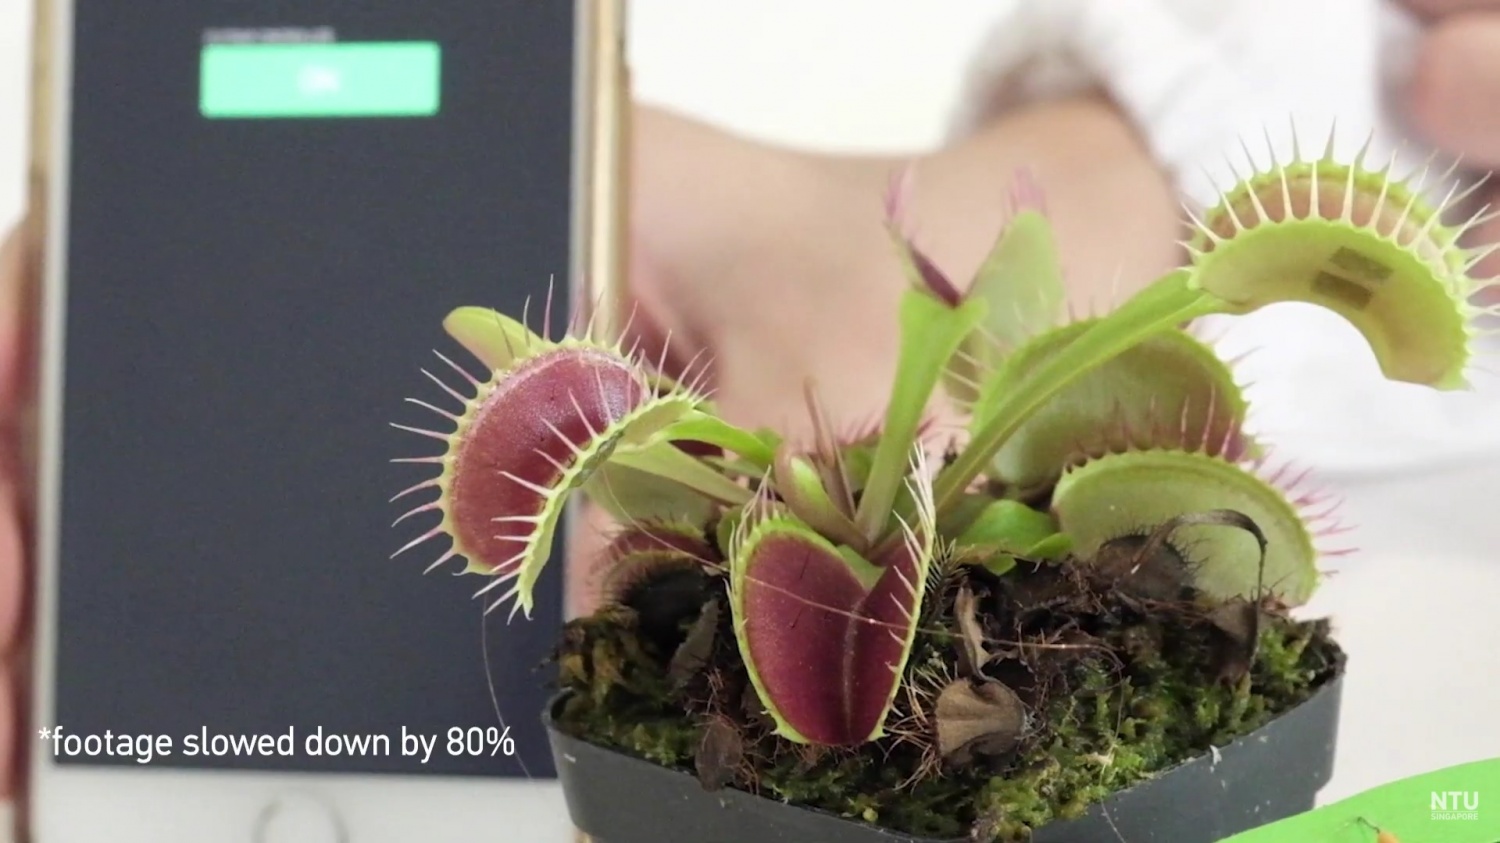 You Can Now Talk to Plants with this Device - How Does it Communicate with Humans?